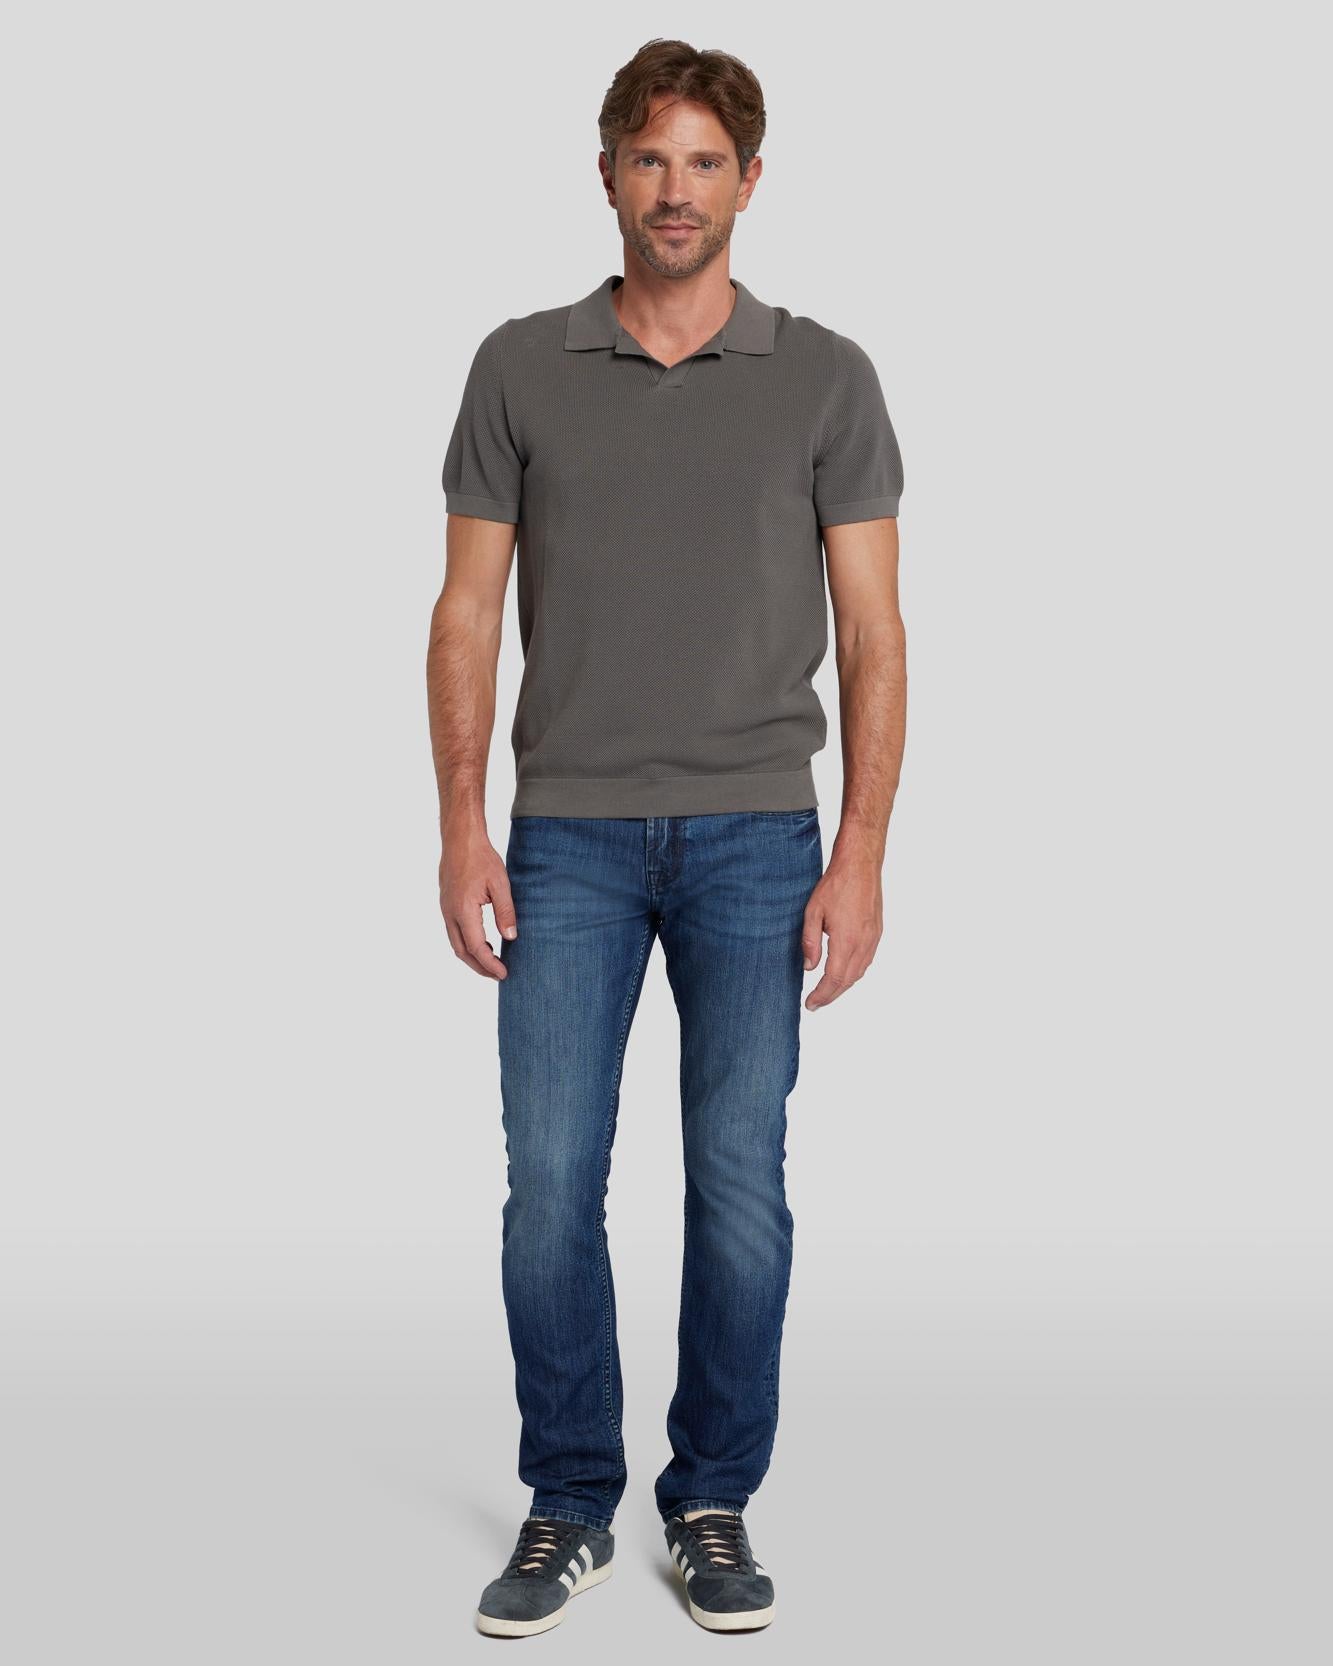 Men's 7 For All Mankind View All: Clothing, Shoes & Accessories